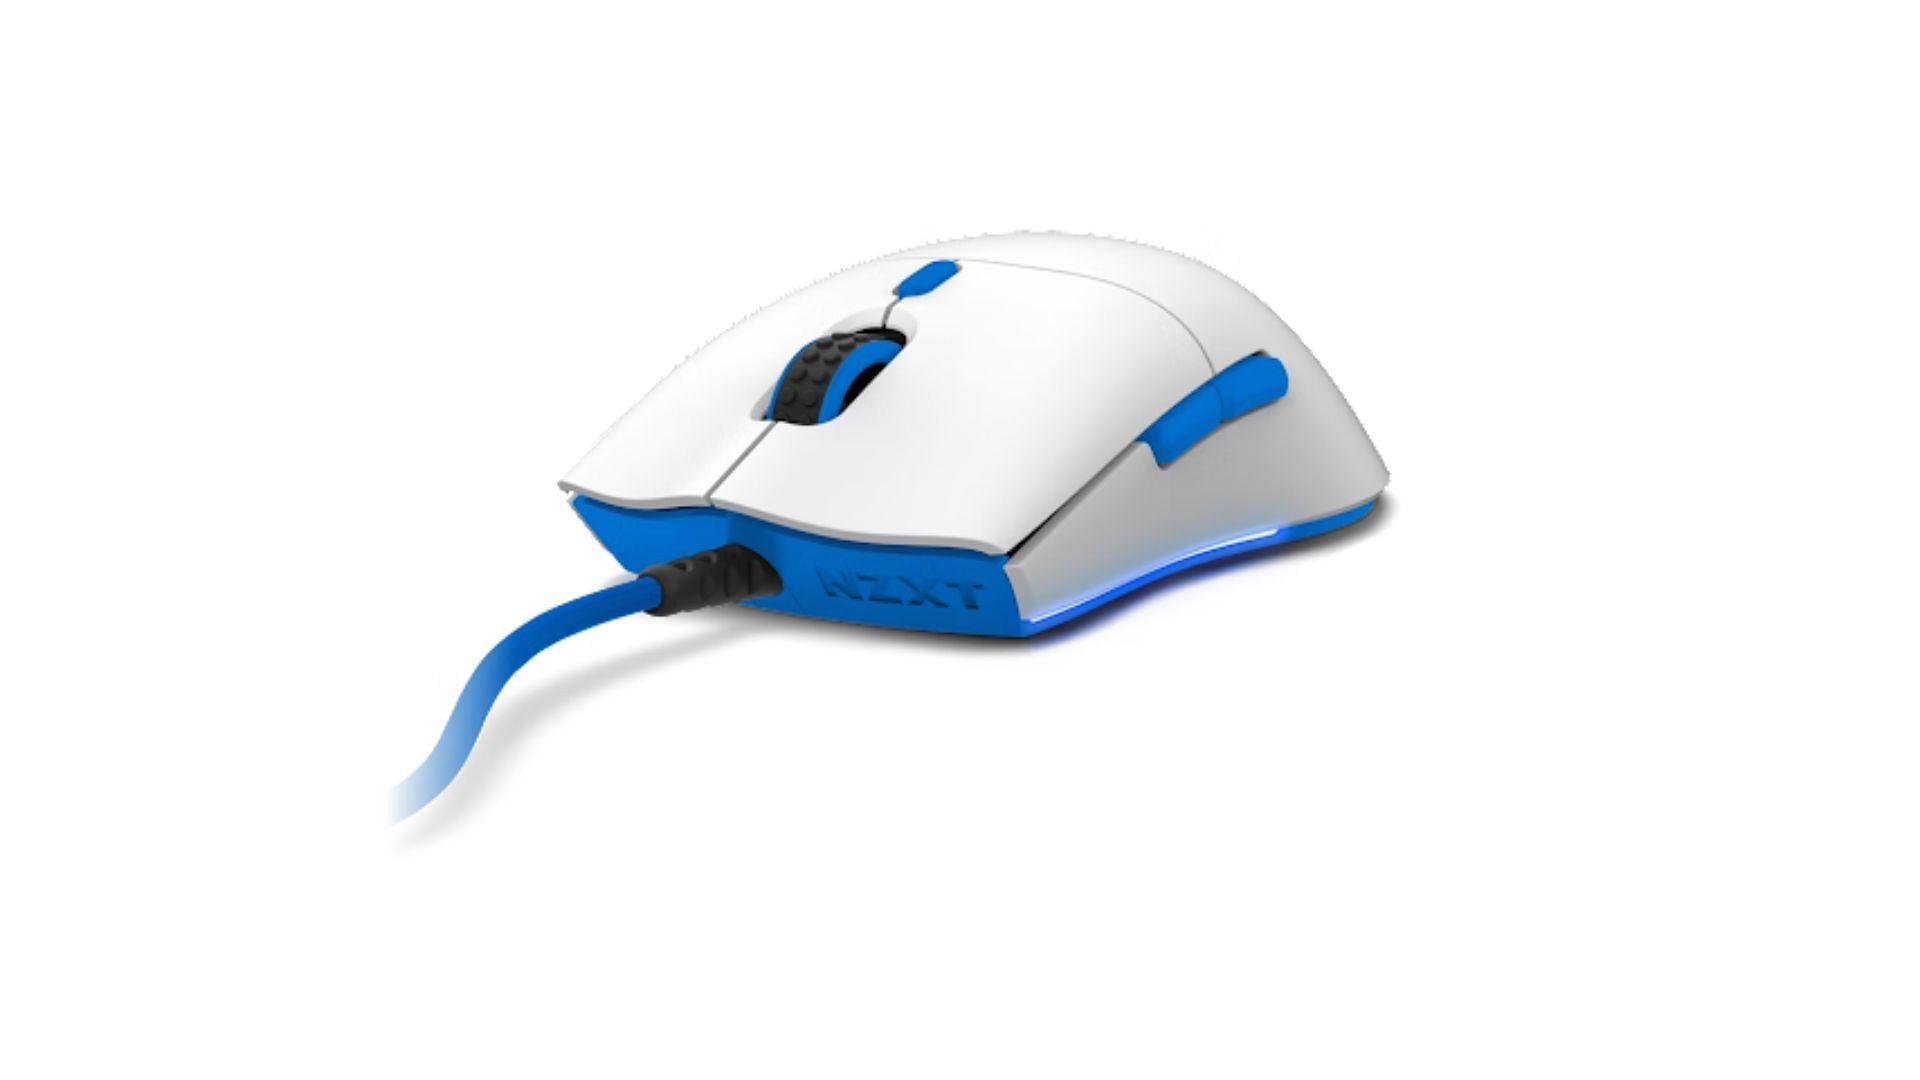 The NZXT Lift gaming mouse (Image via NZXT)